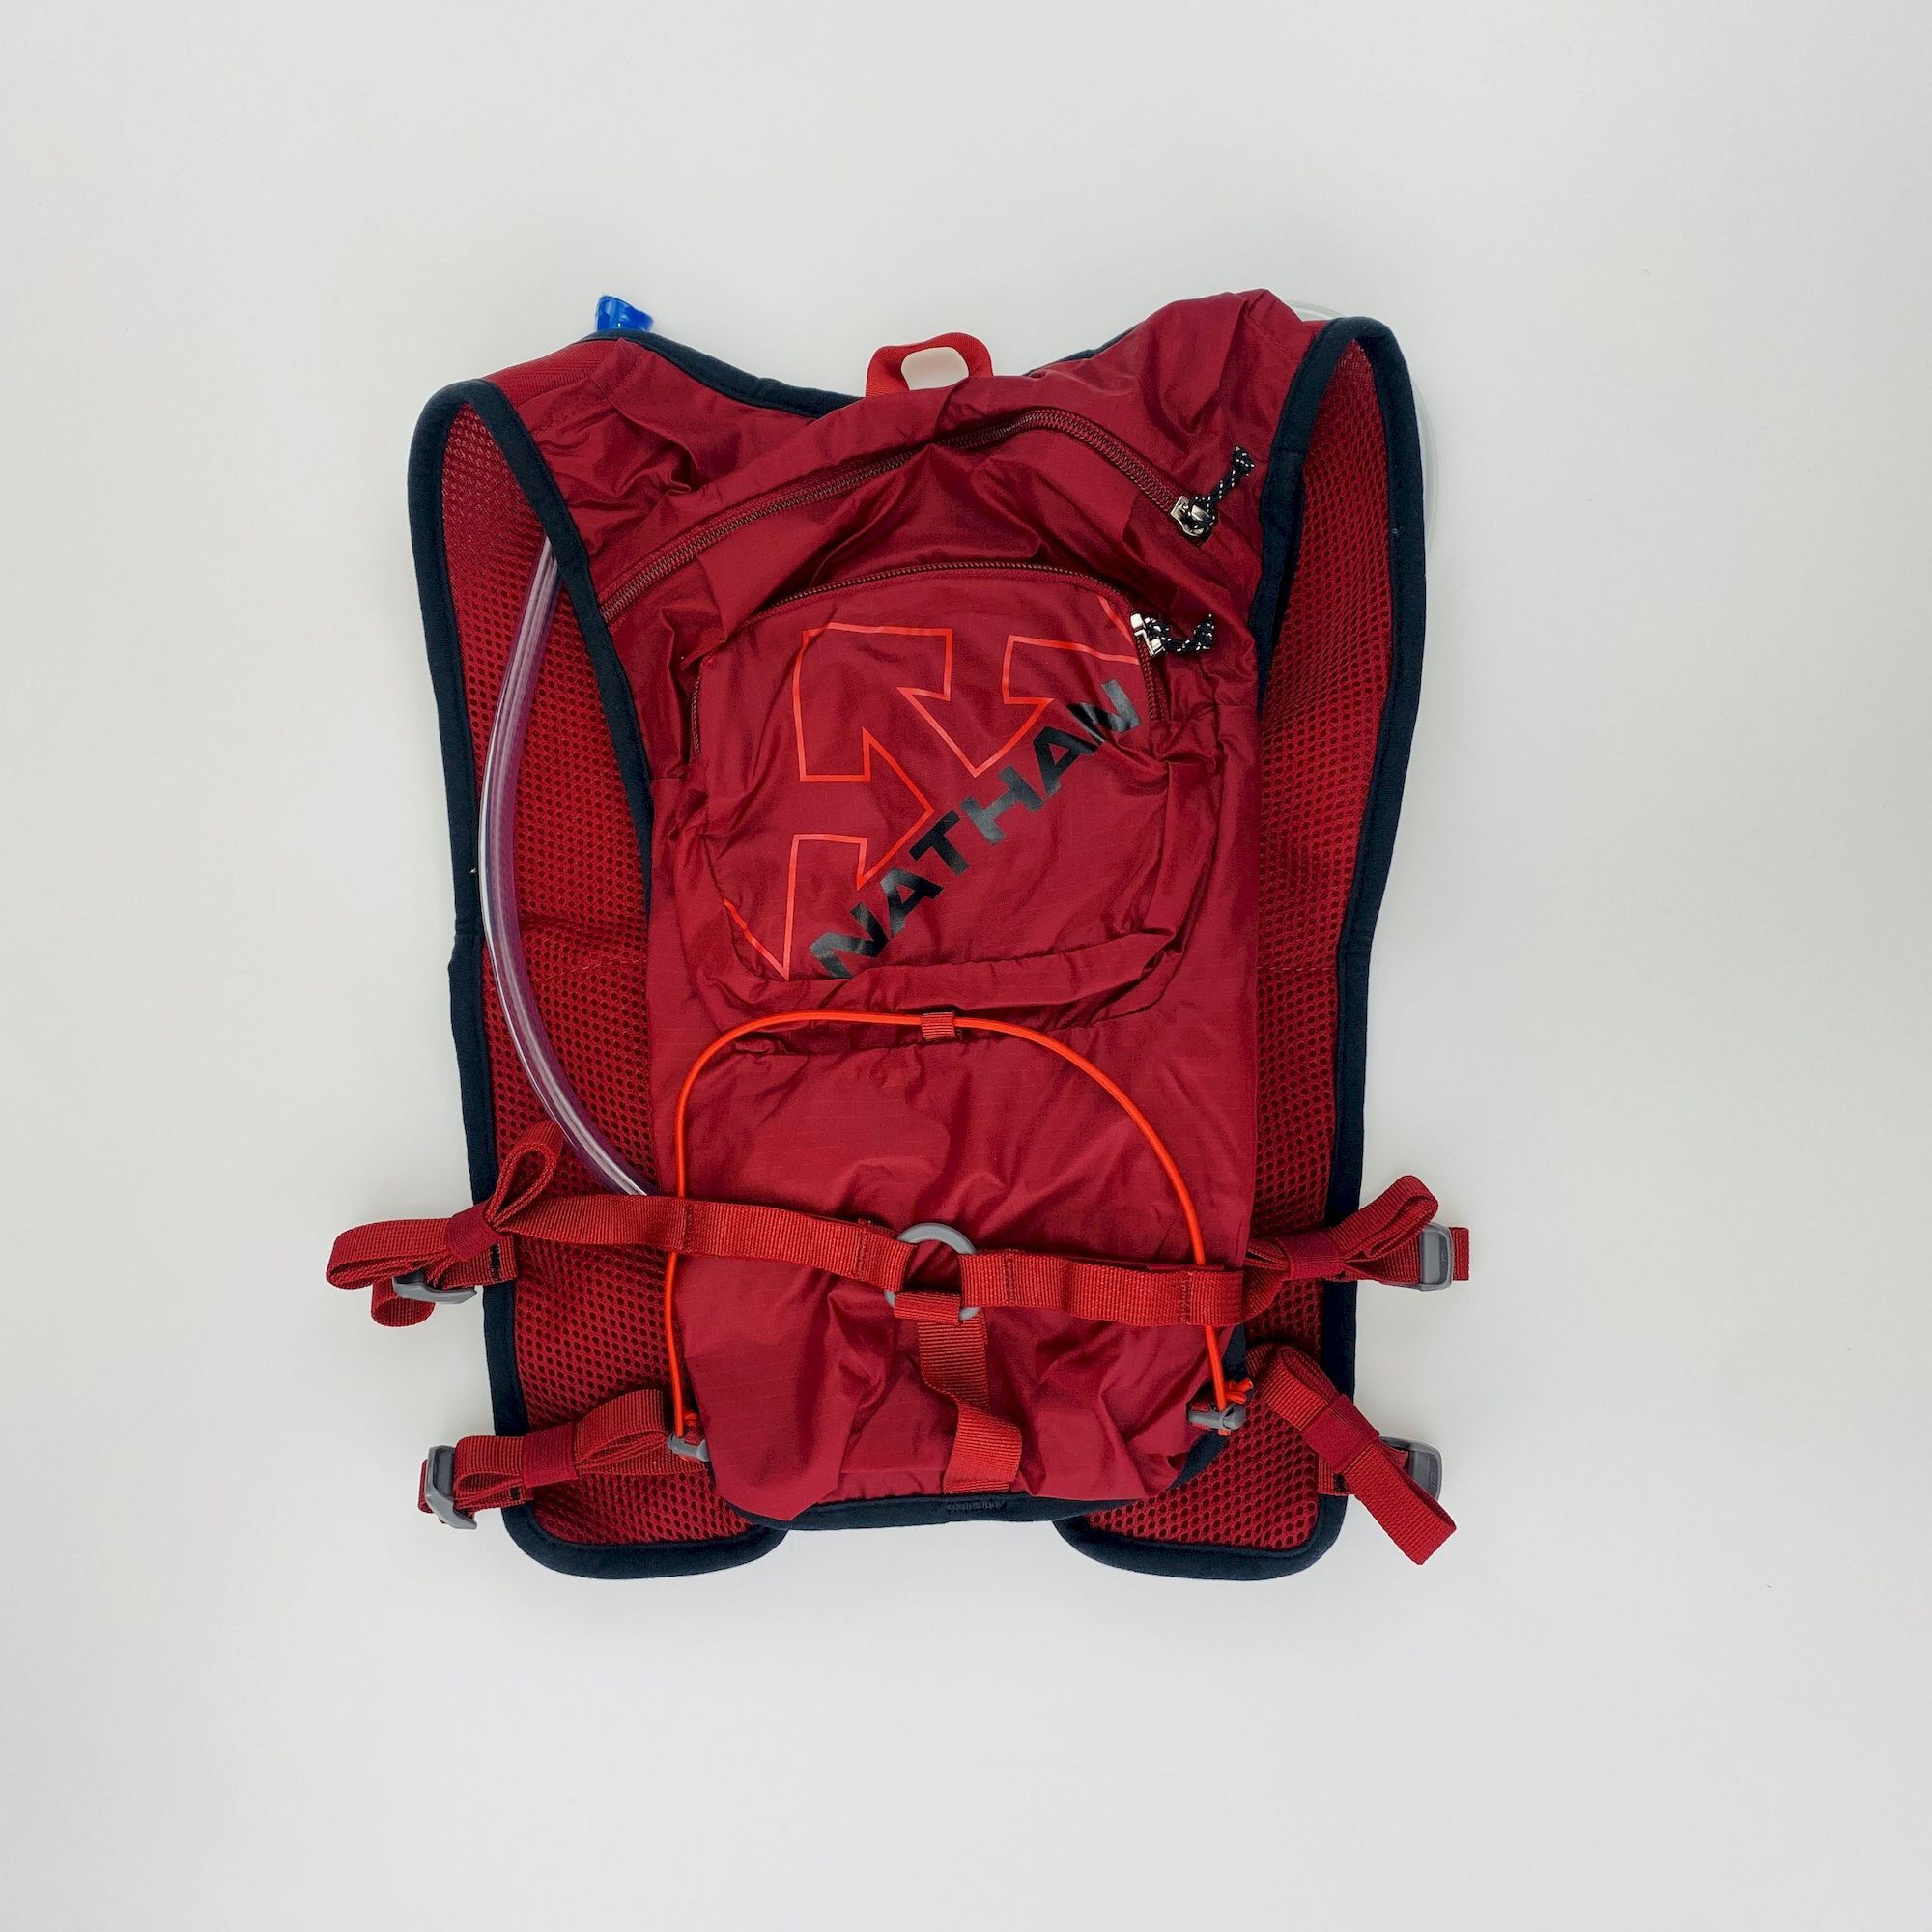 Nathan QuickStart 6L (1.5L Bladder Included) - Seconde main Sac à dos trail - Rouge - Taille unique | Hardloop